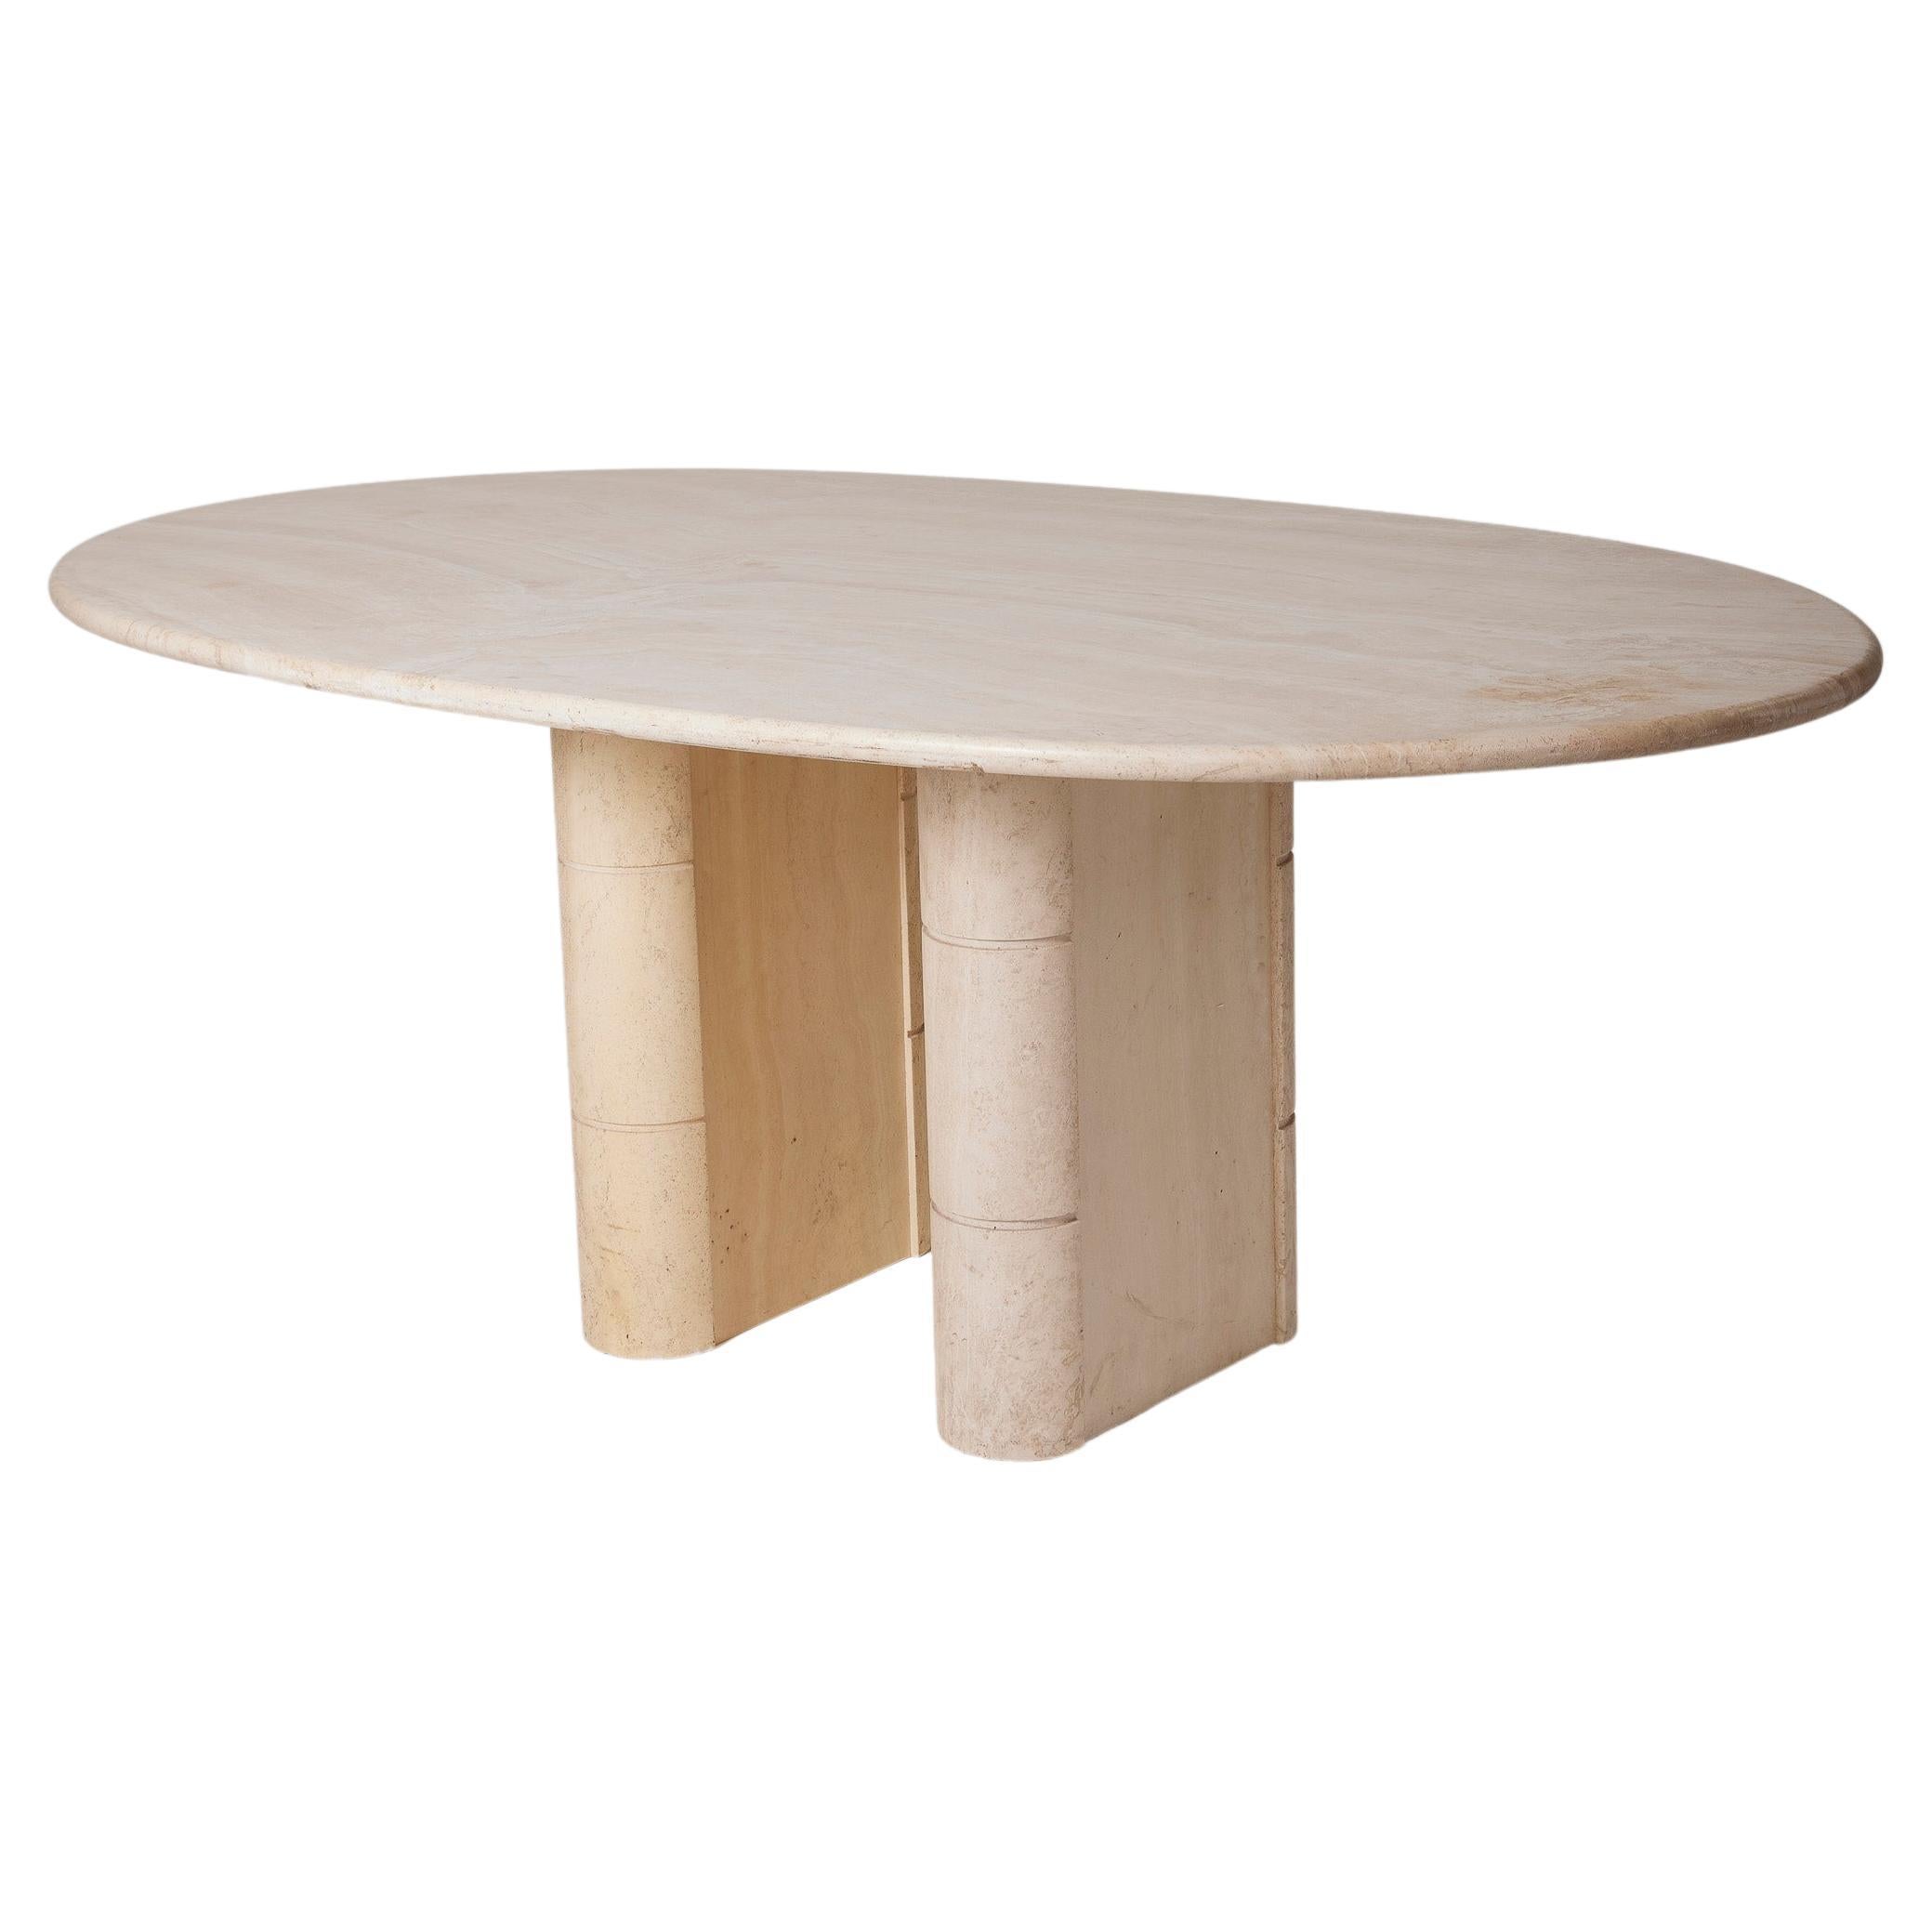 Travertine dining table For Sale